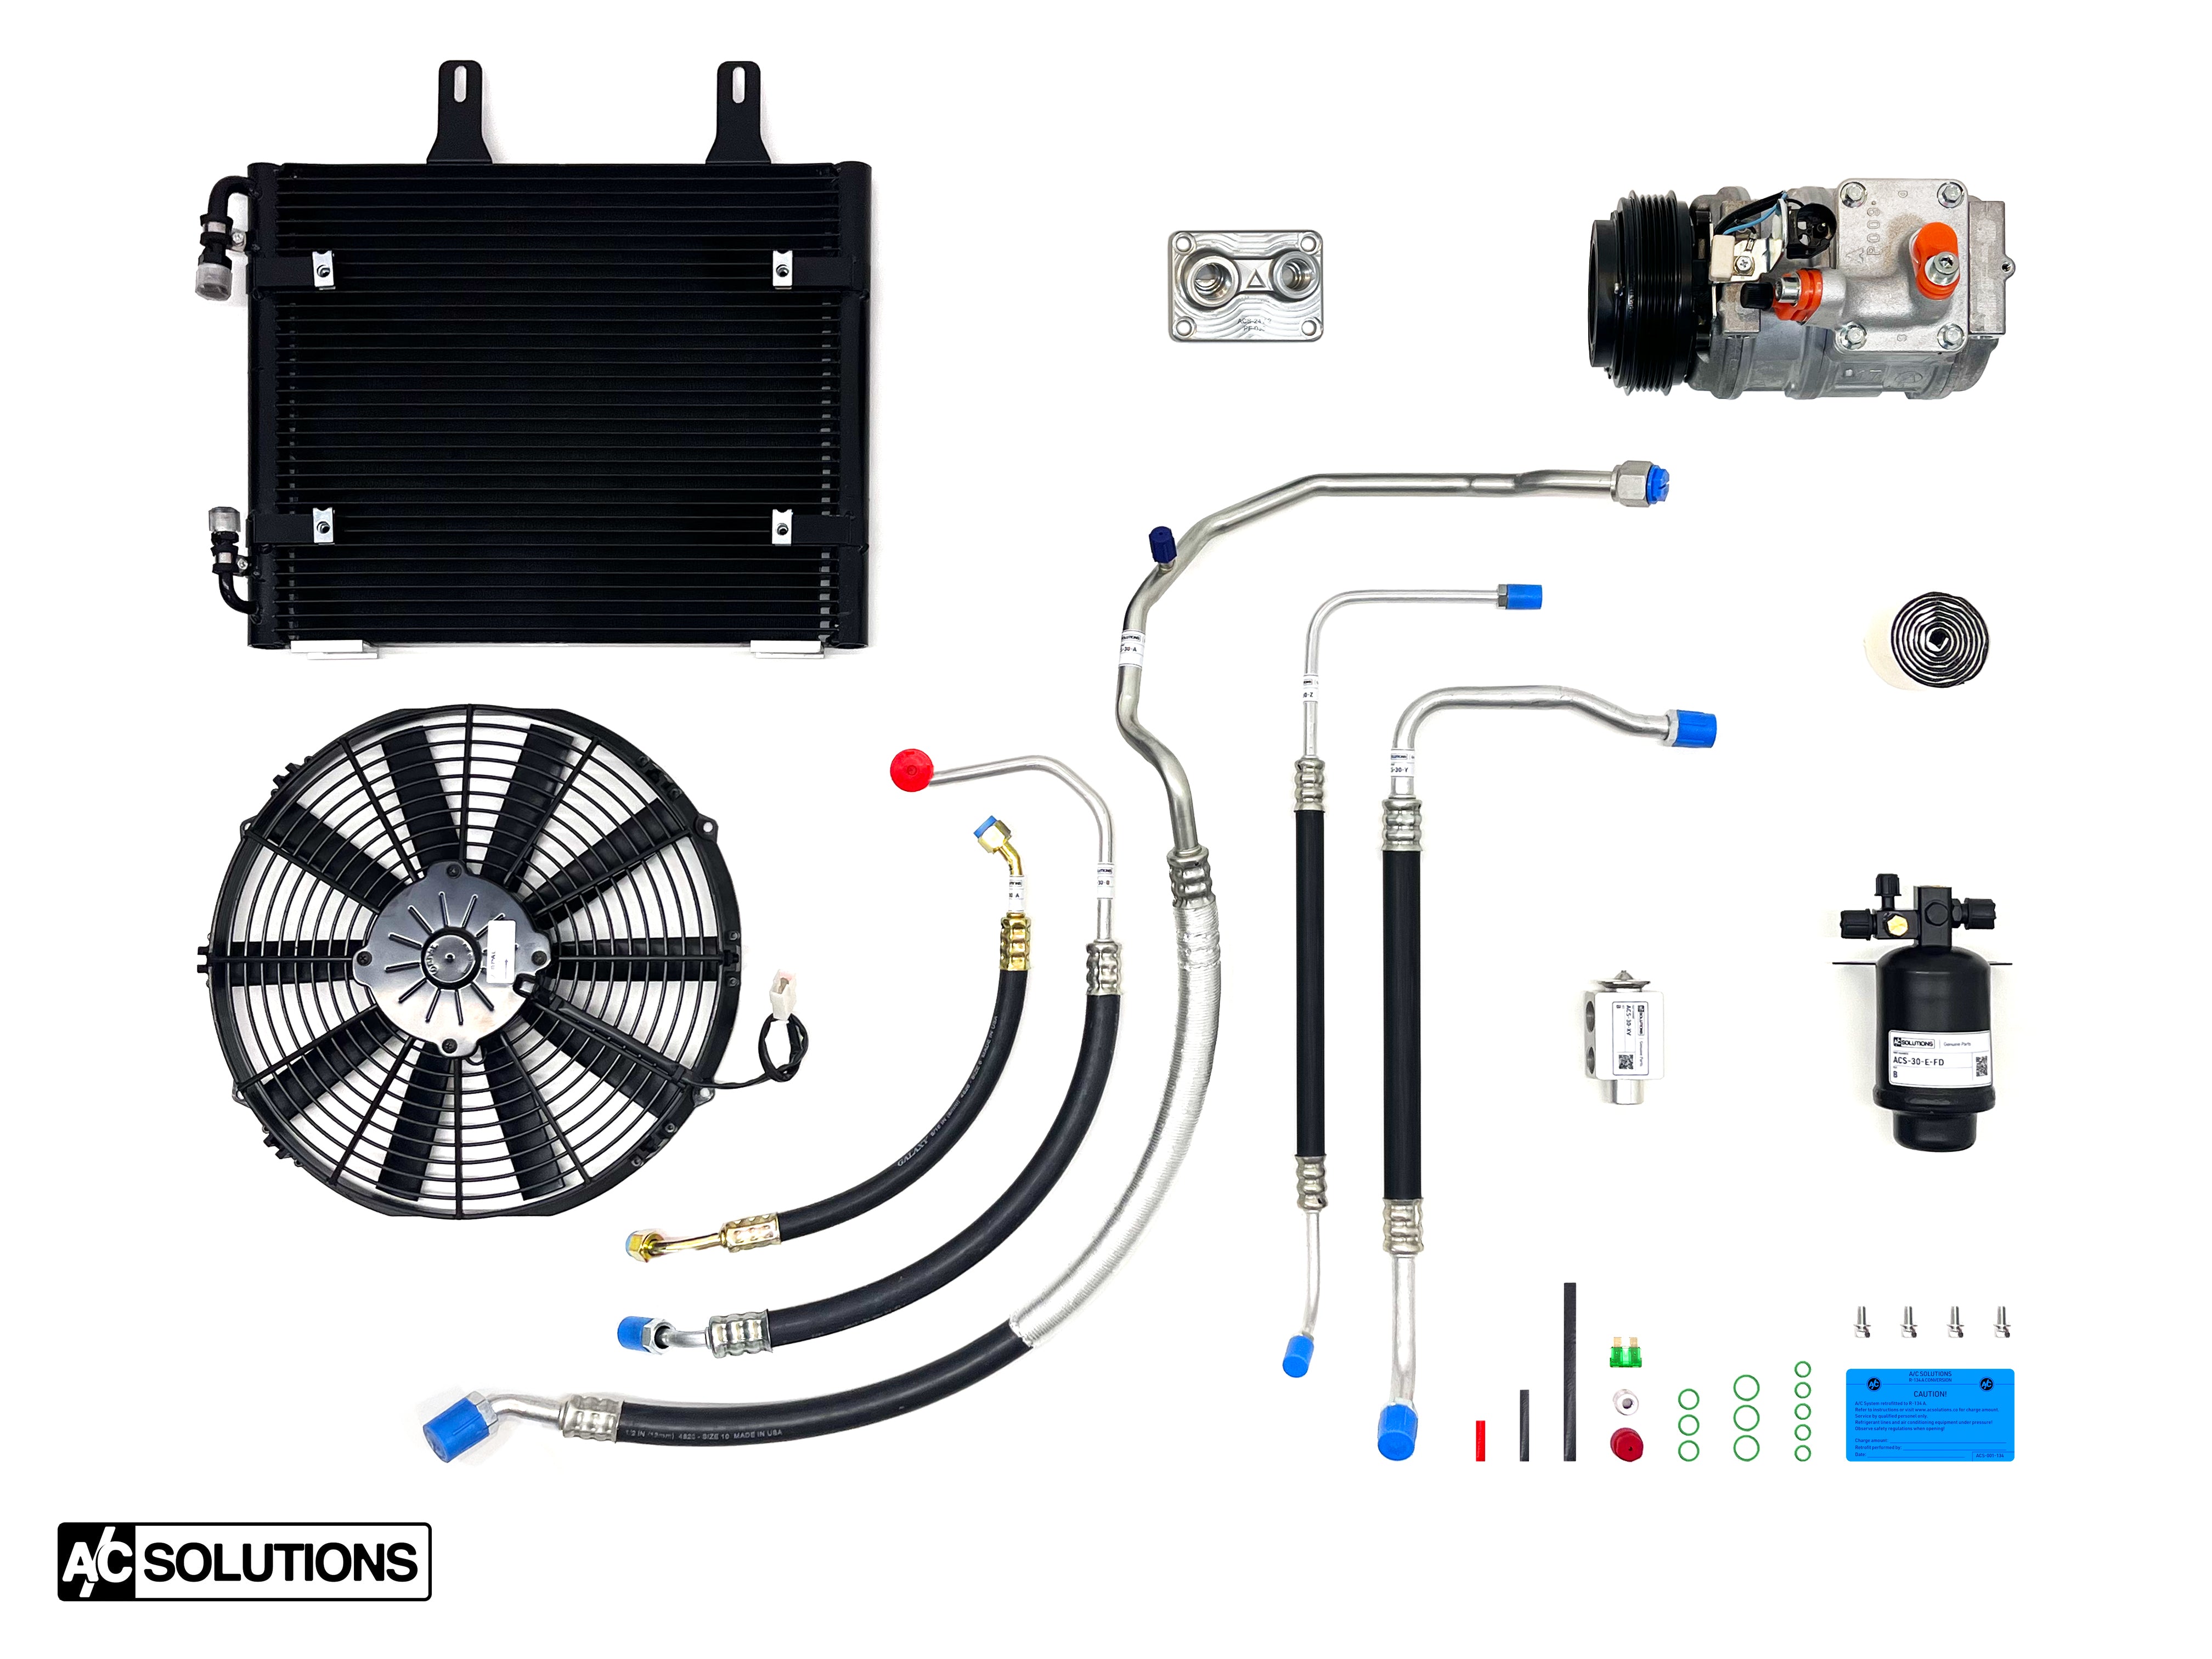 A/C Solutions BMW E30 24v Swap Conversion Kit (S50, S52, S54, and more)